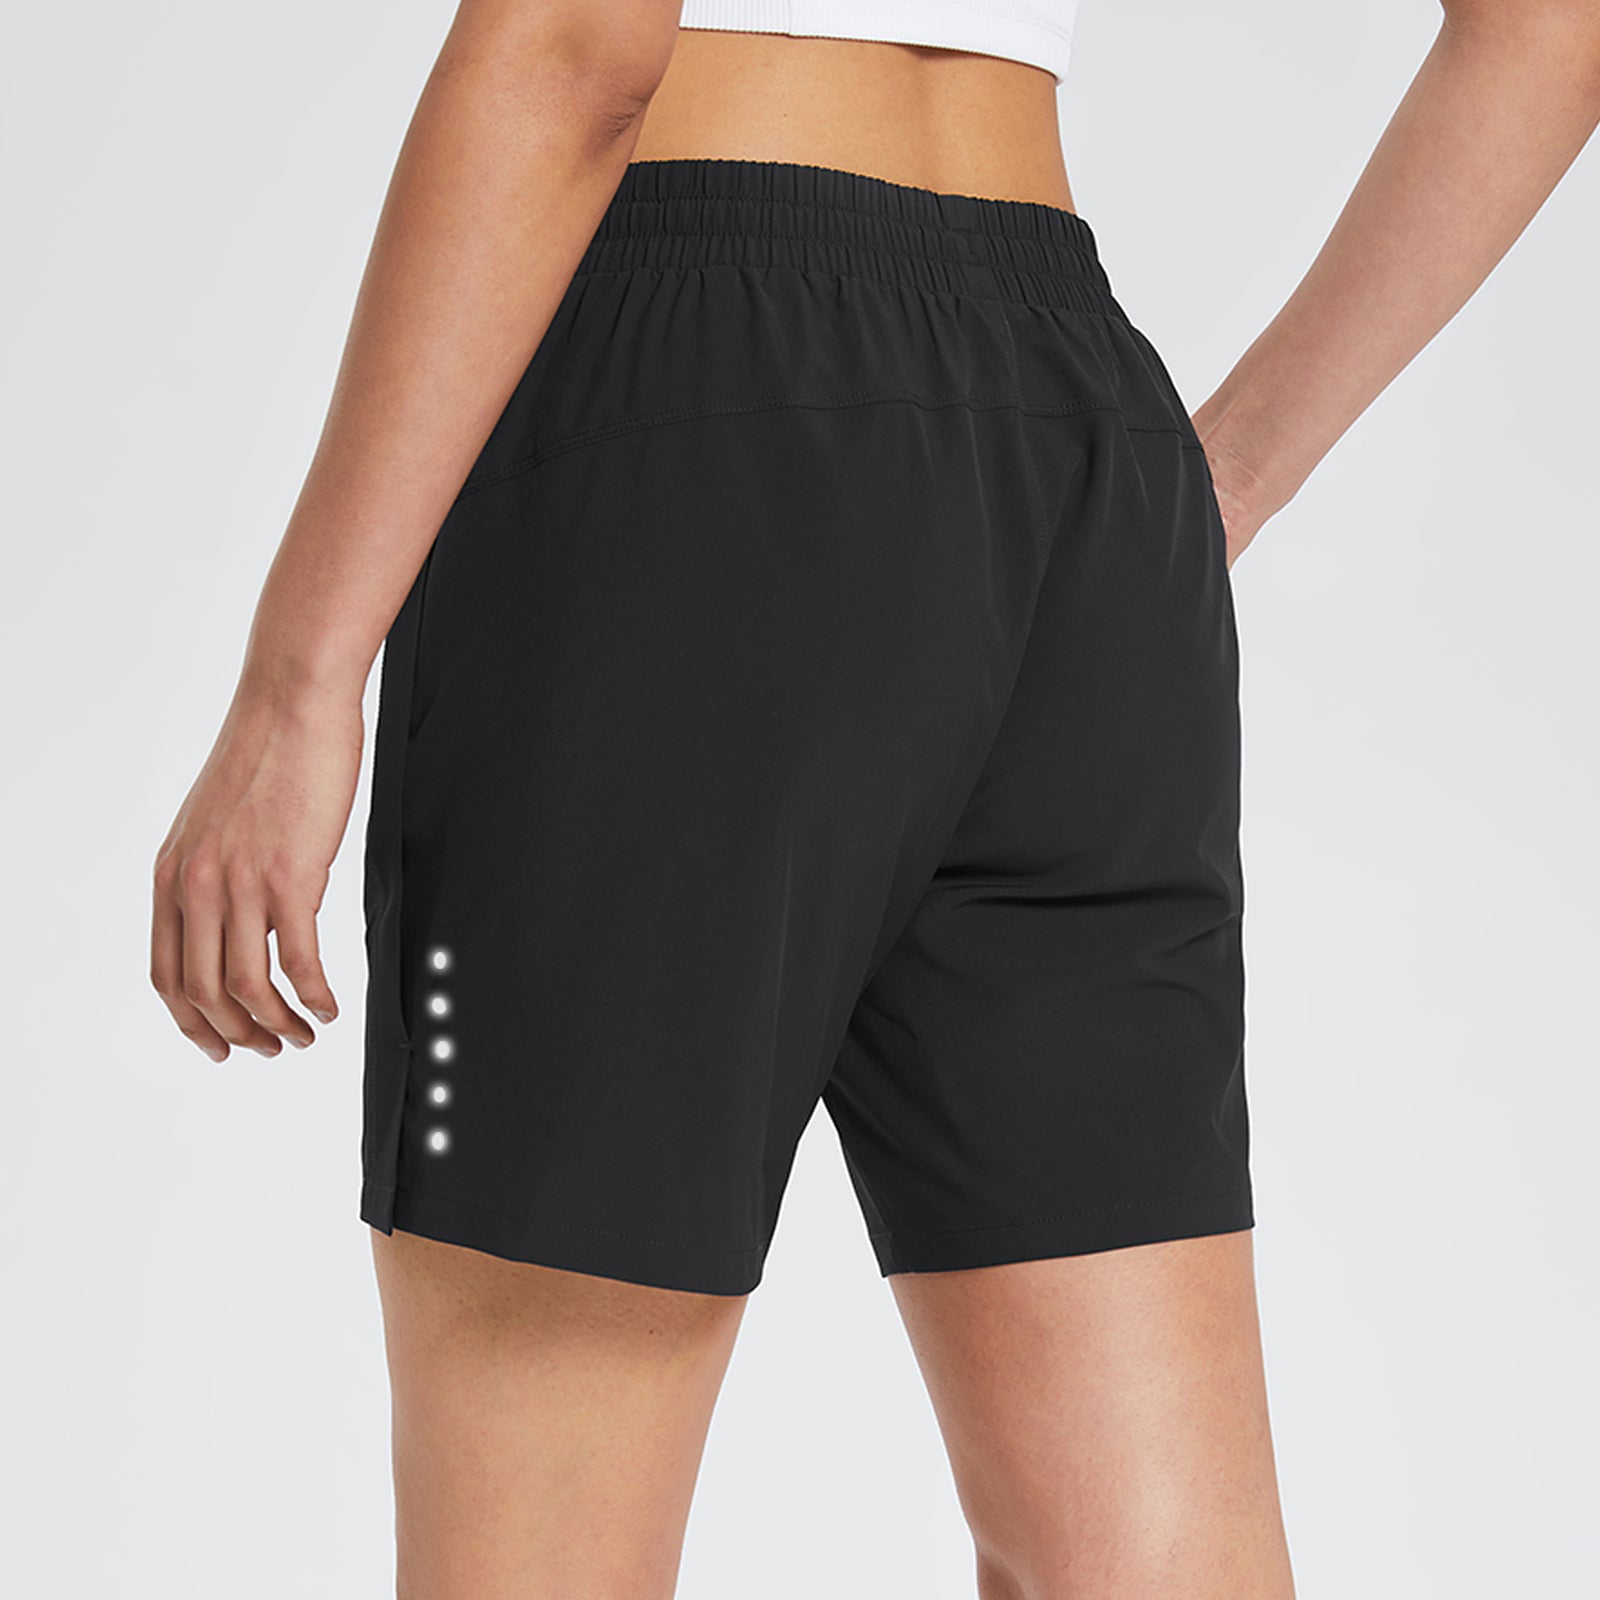 BALEAF Women's 4 Inches High Waisted Athletic Lined Running Shorts